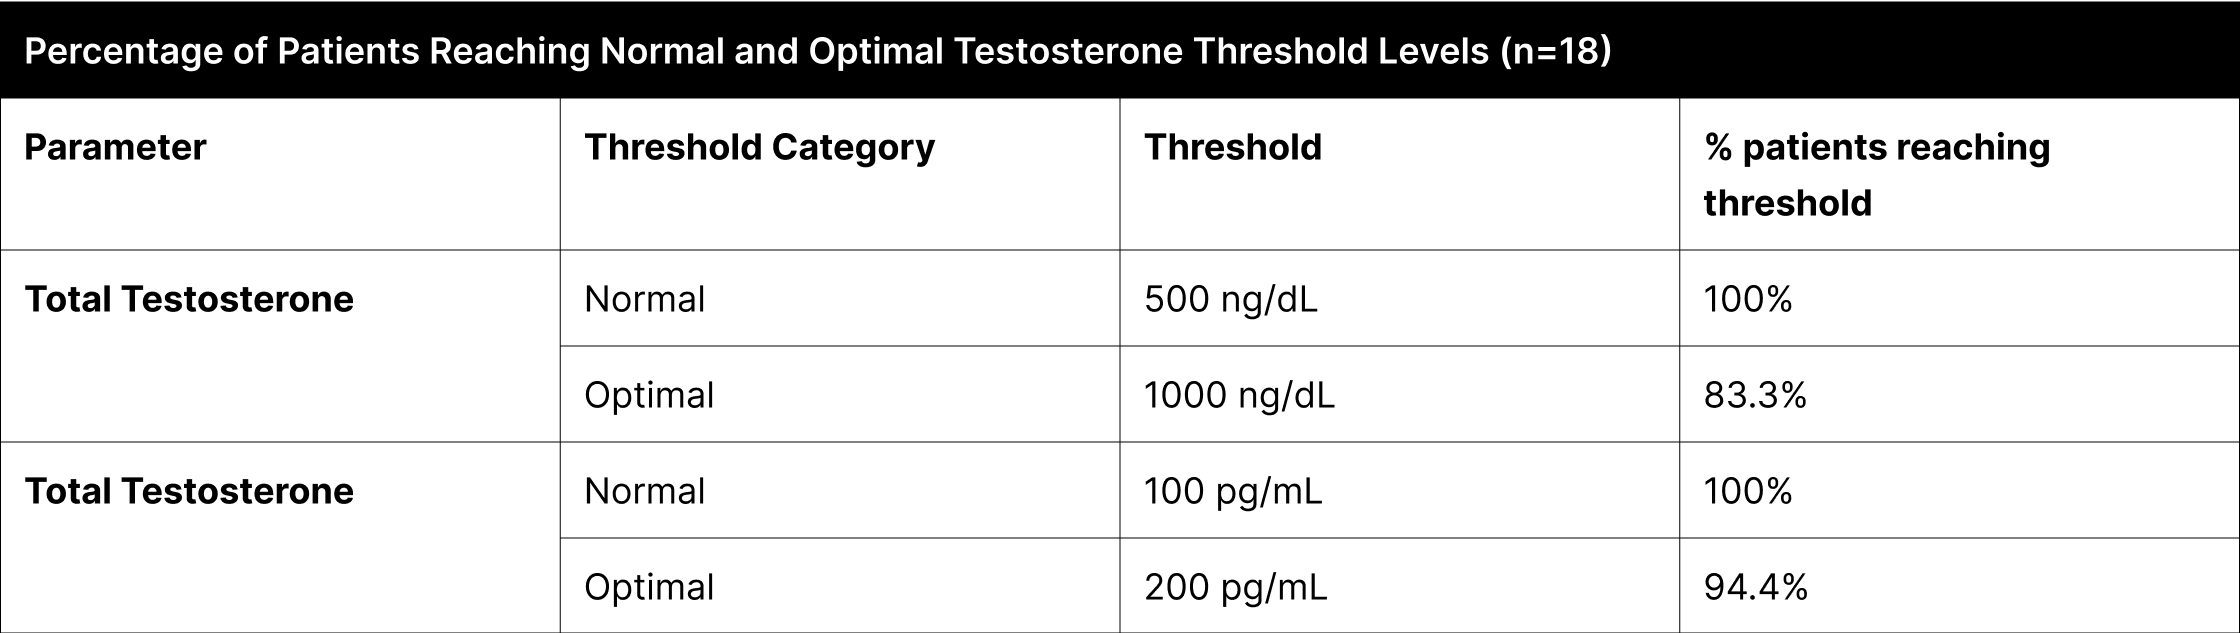 Percentage of Patients Reaching Normal and Optimal Testosterone Threshold Levels (n=18)